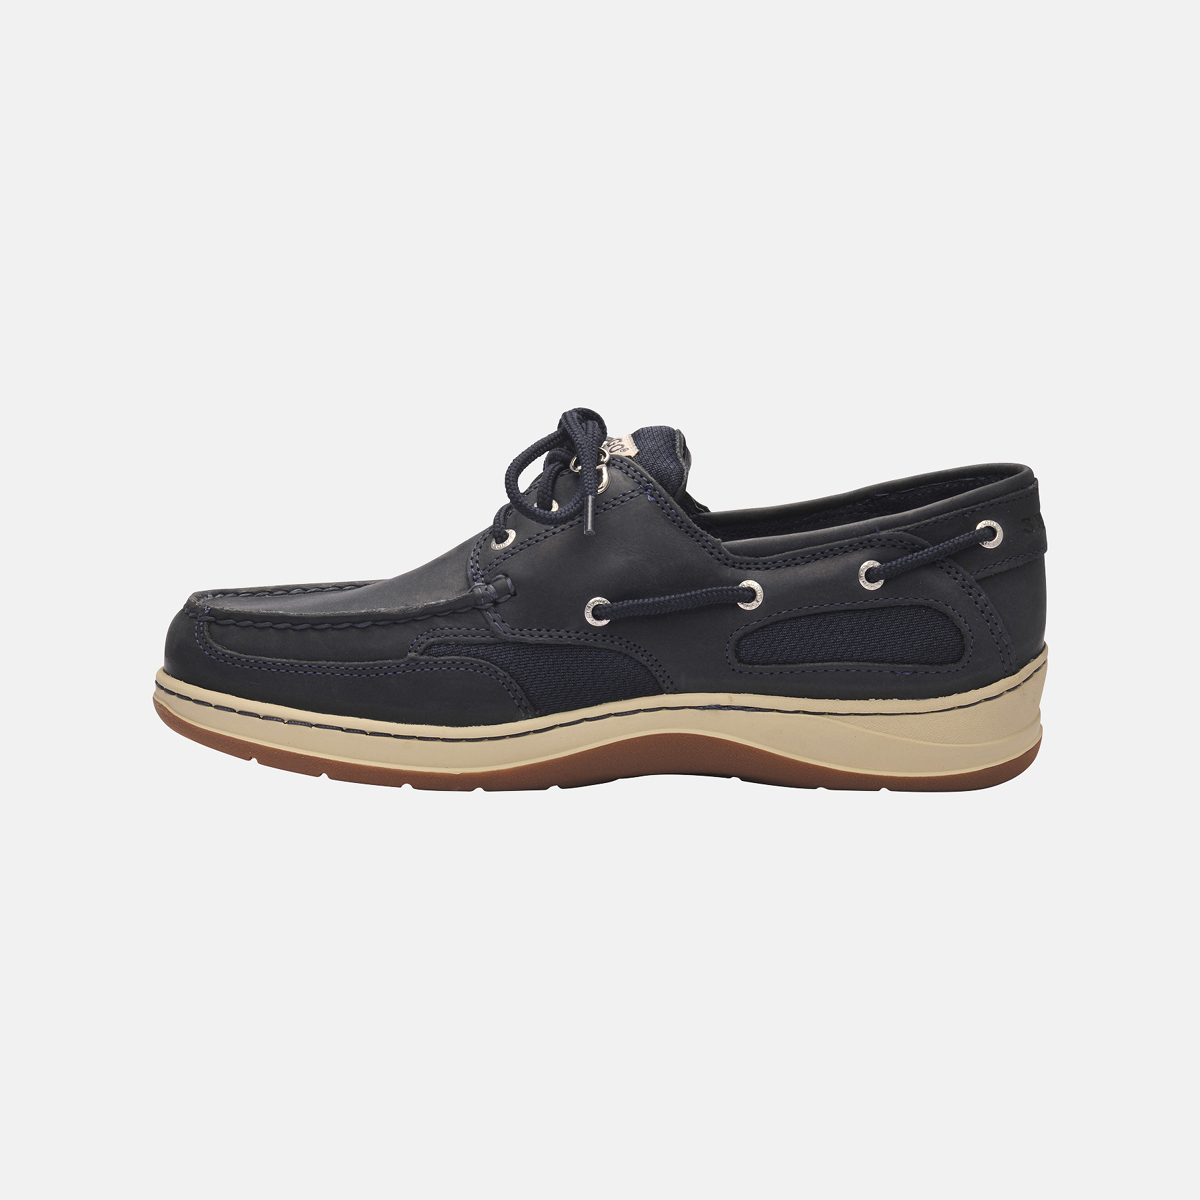 Sebago Clovehitch II chaussures bateau homme blue navy leather, taille 42 (US 8.5)